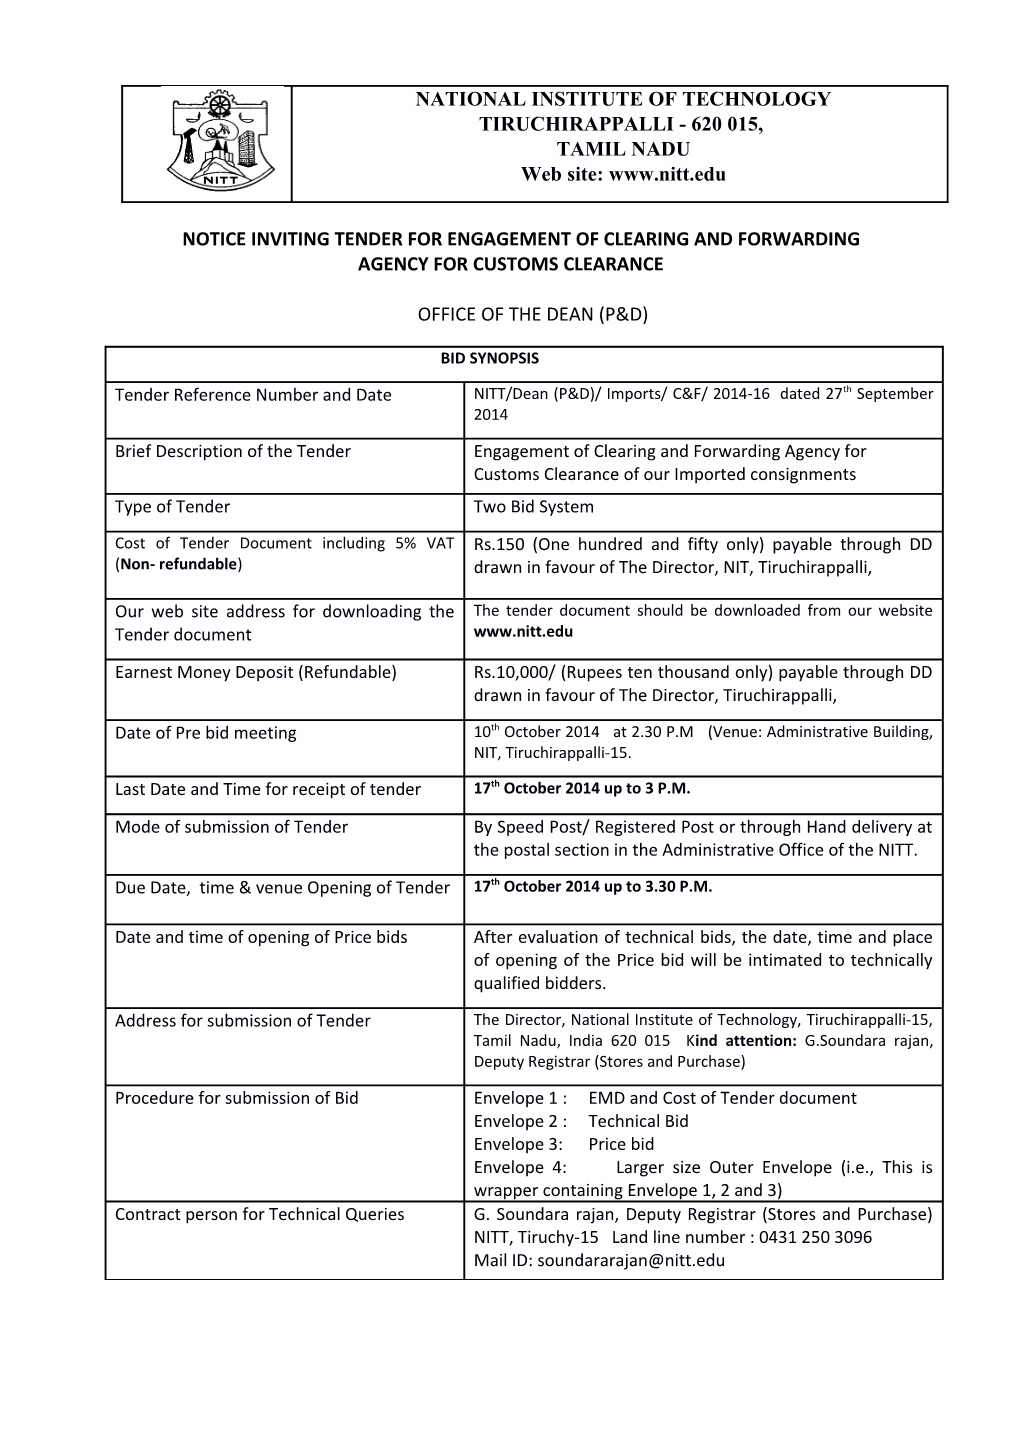 Notice Inviting Tender for Engagement of Clearing and Forwarding Agency for Customs Clearance